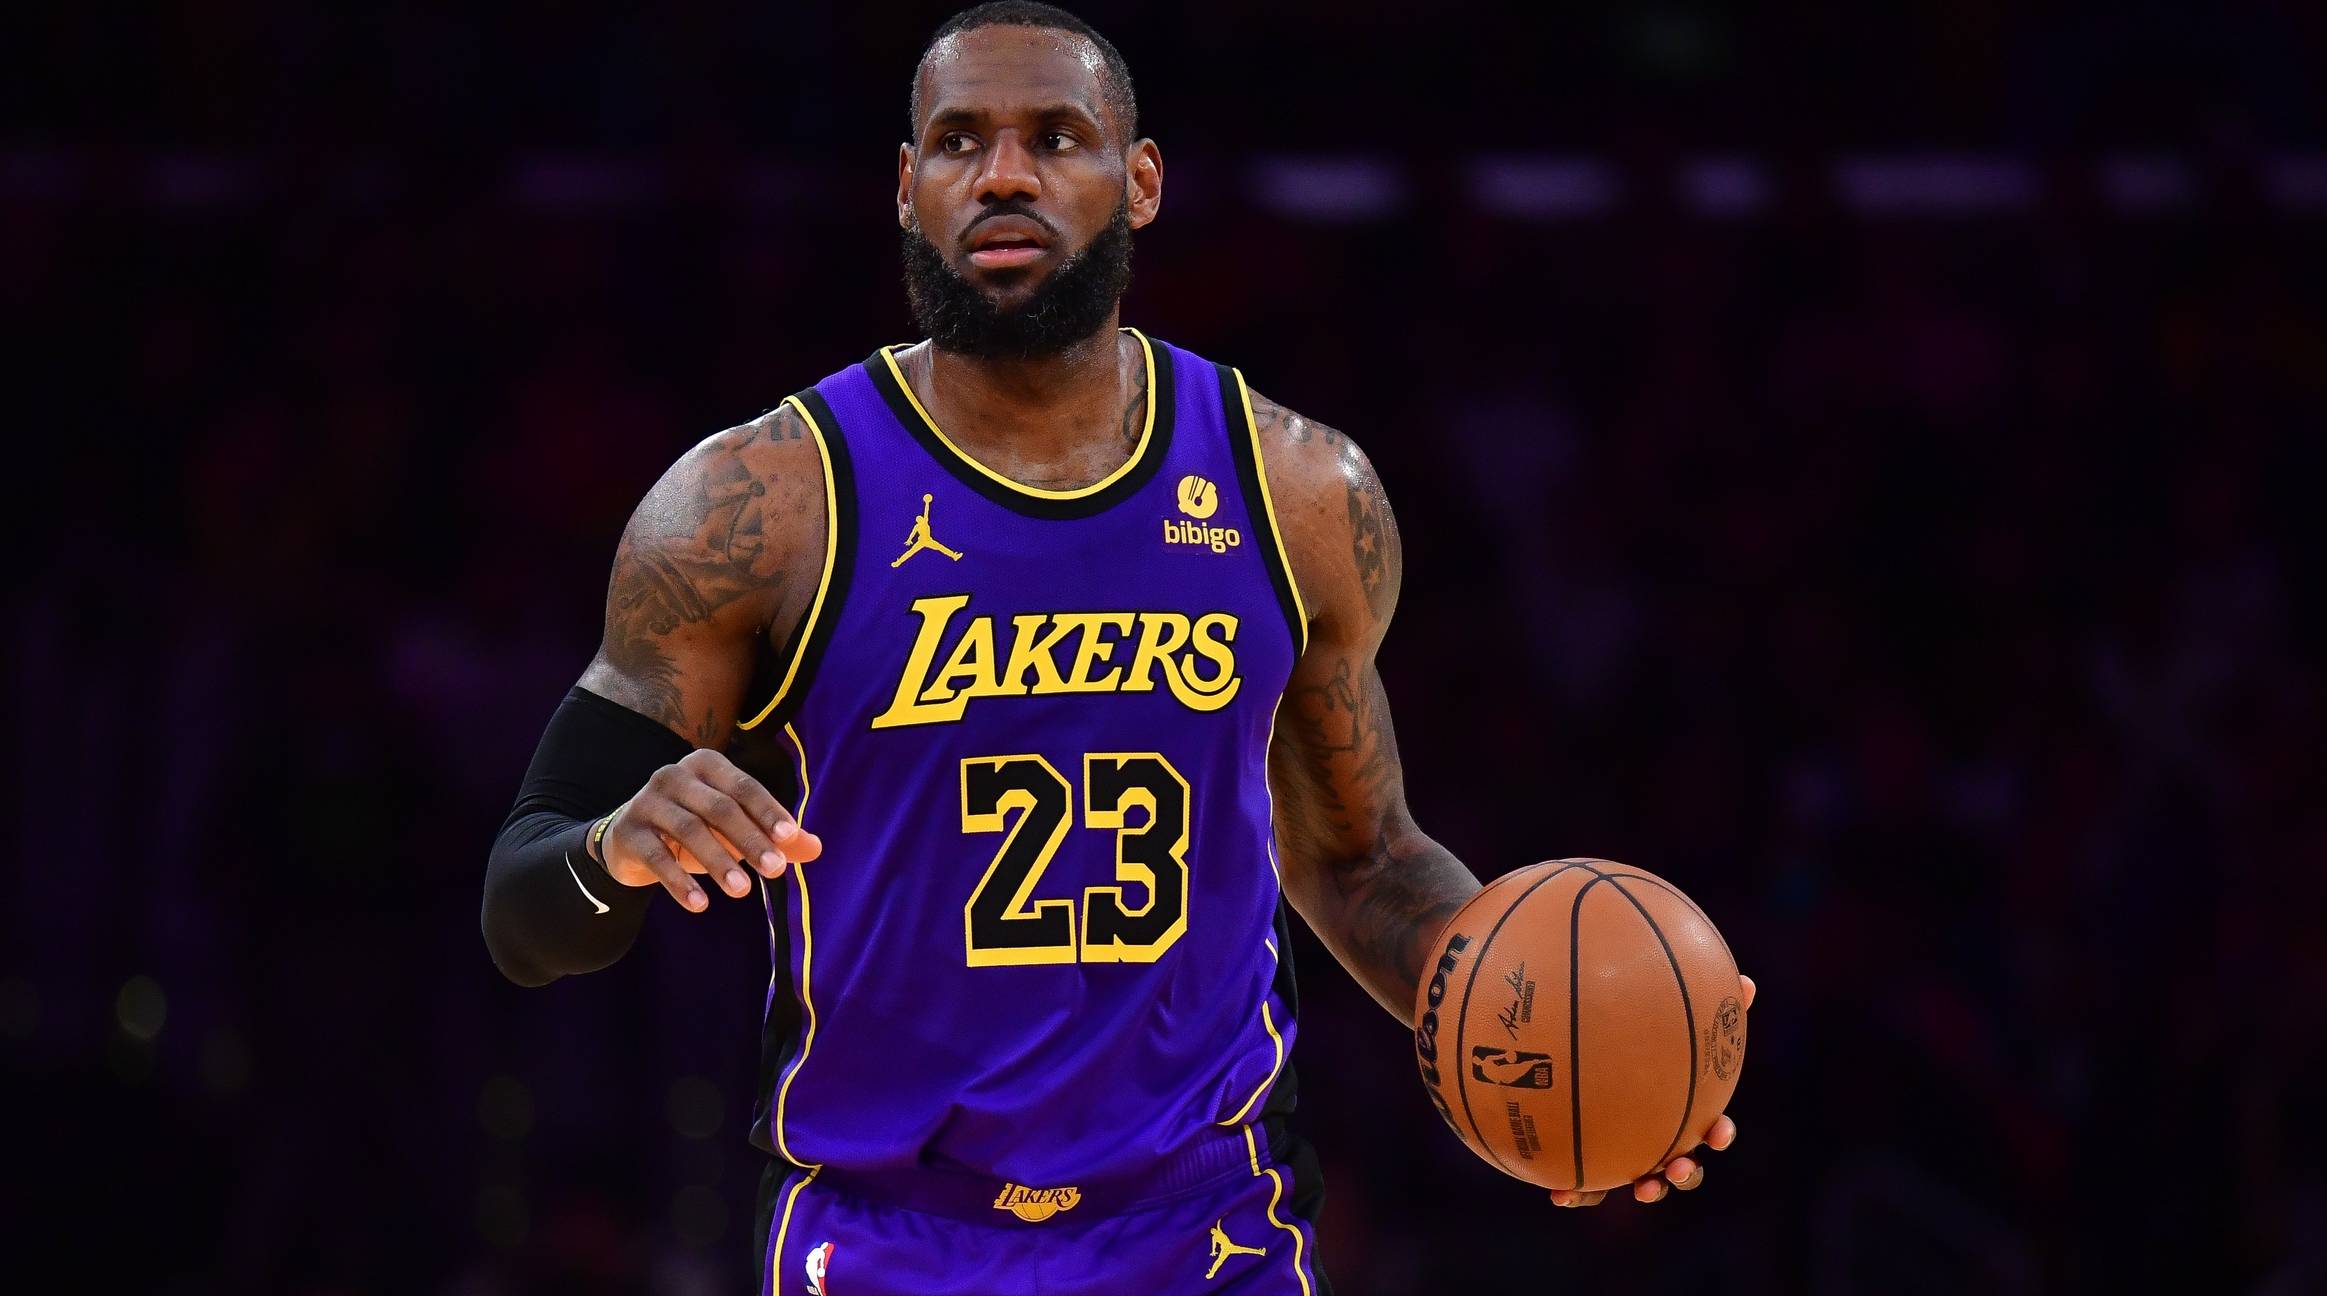 Lakers forward LeBron James dribbles a ball in a game.